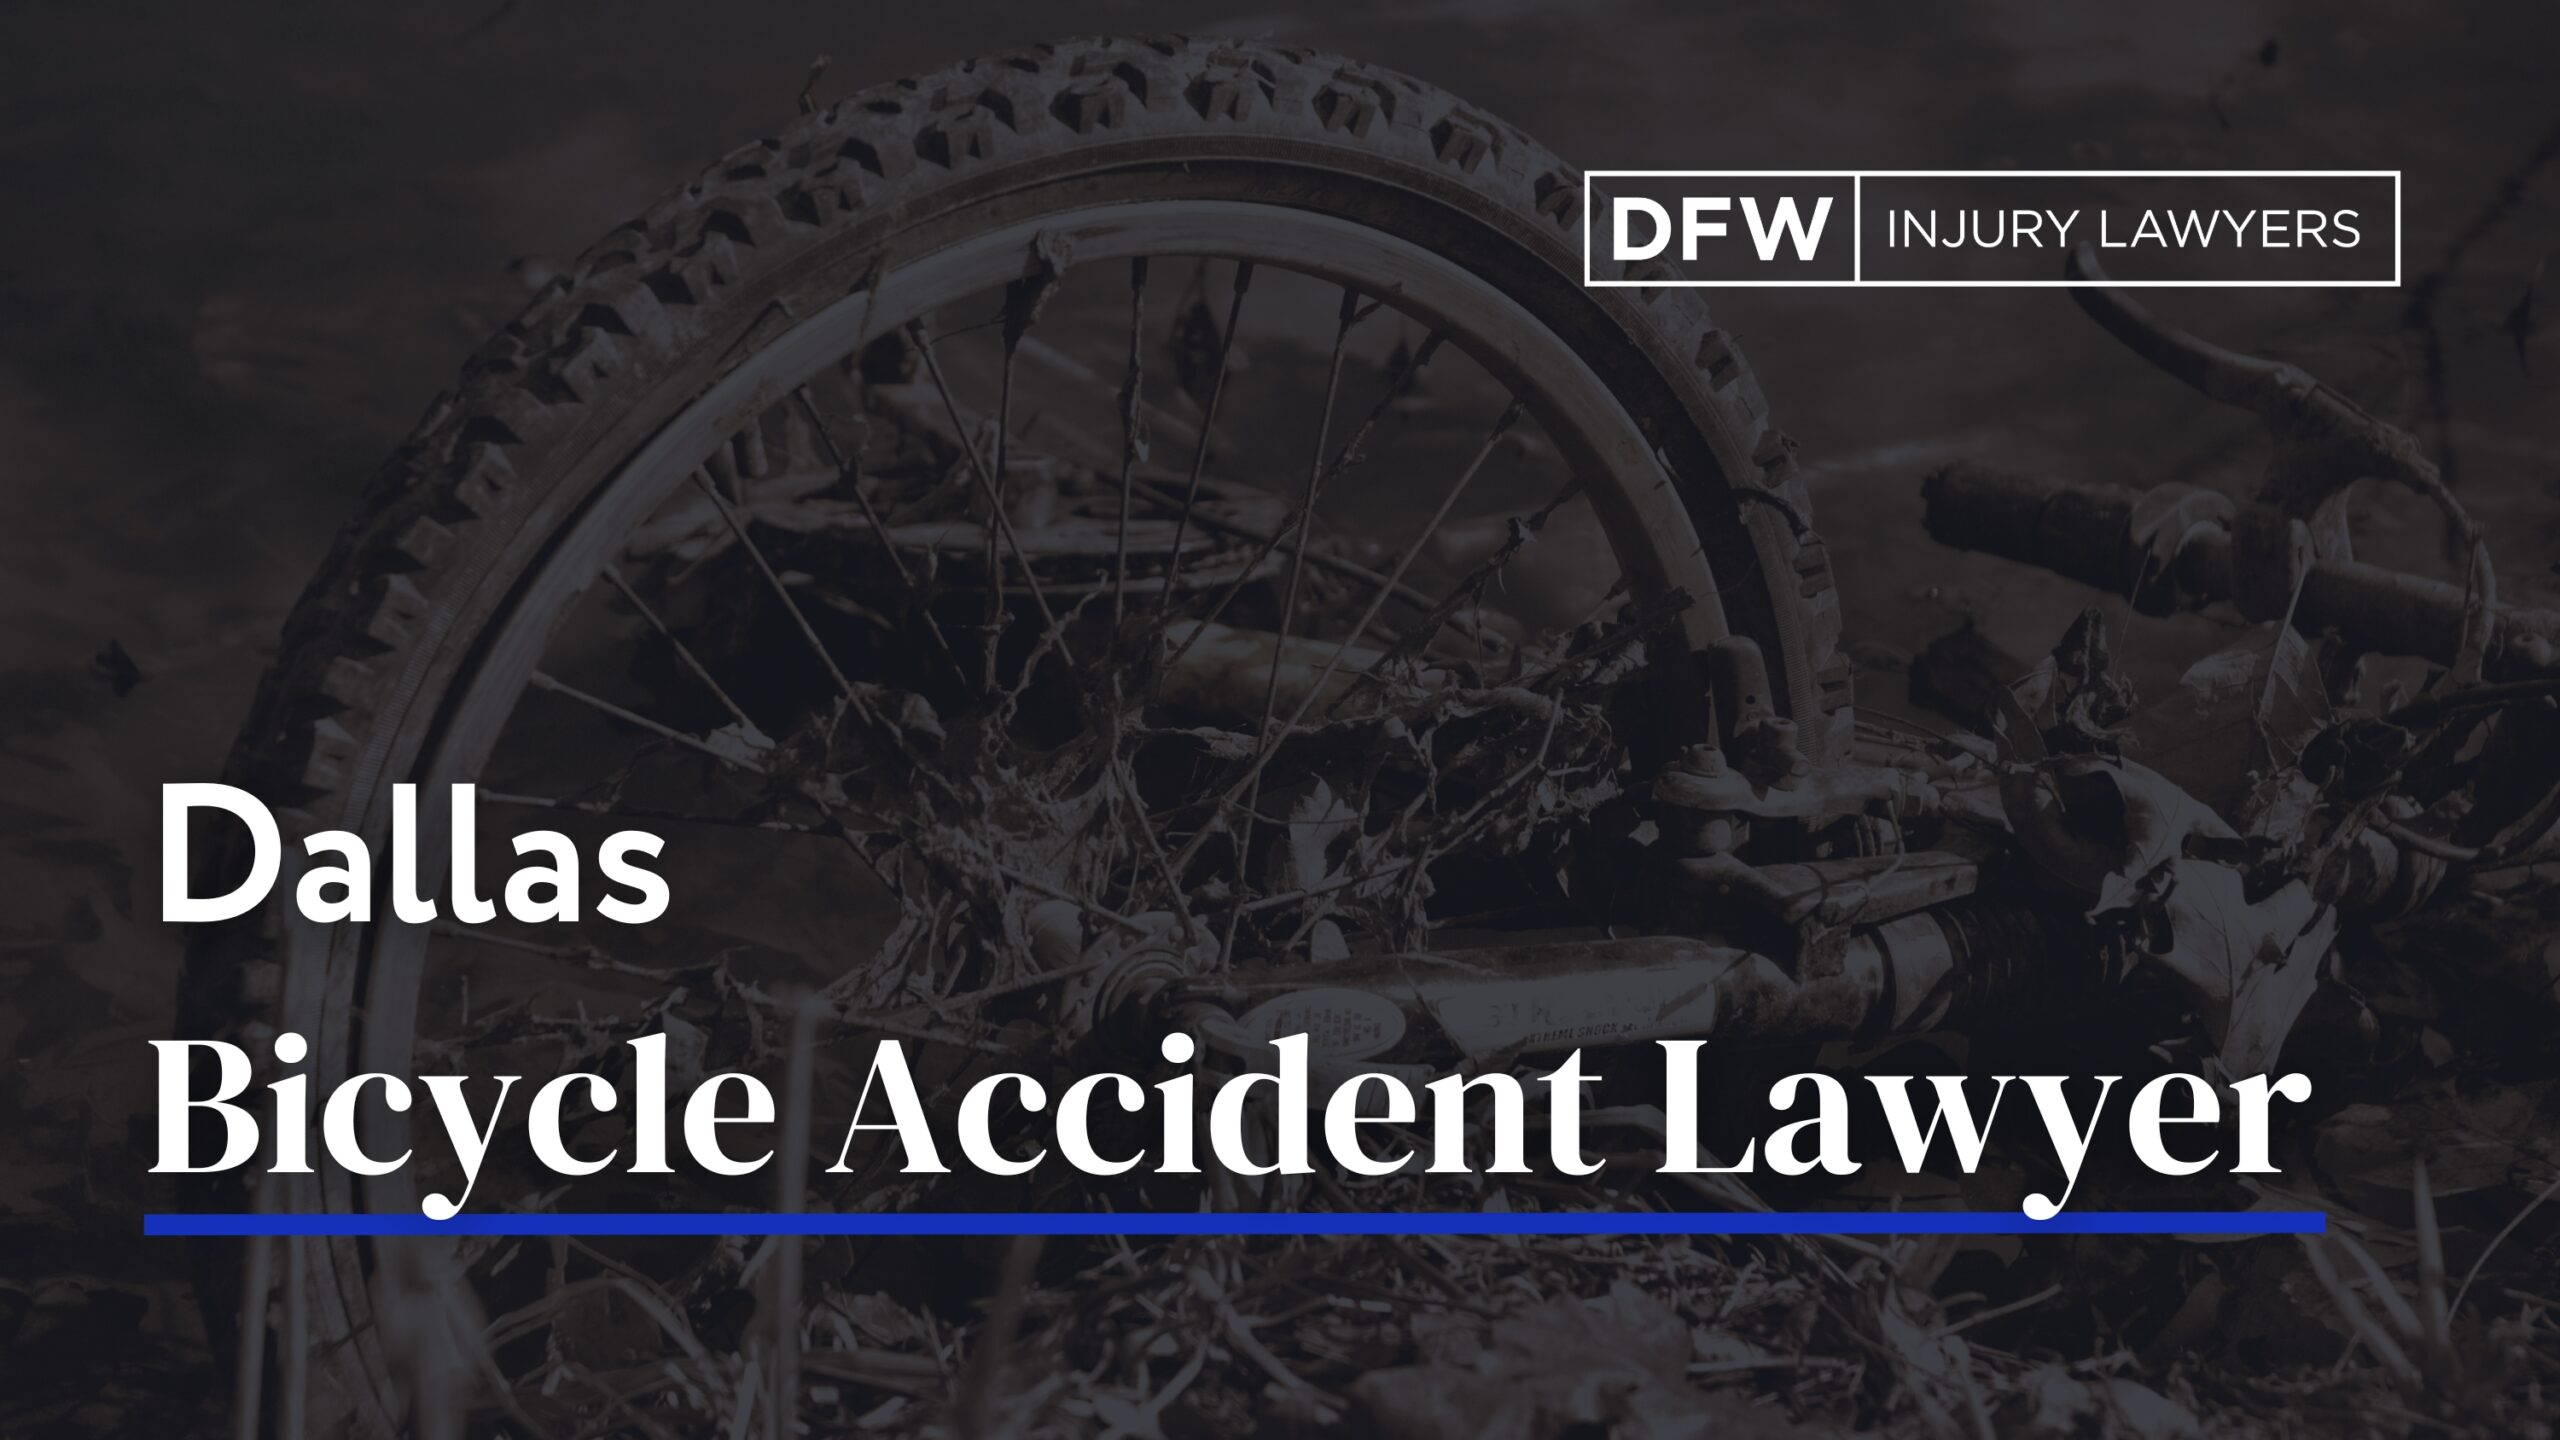 Dallas Bicycle Accident Lawyer - DFW